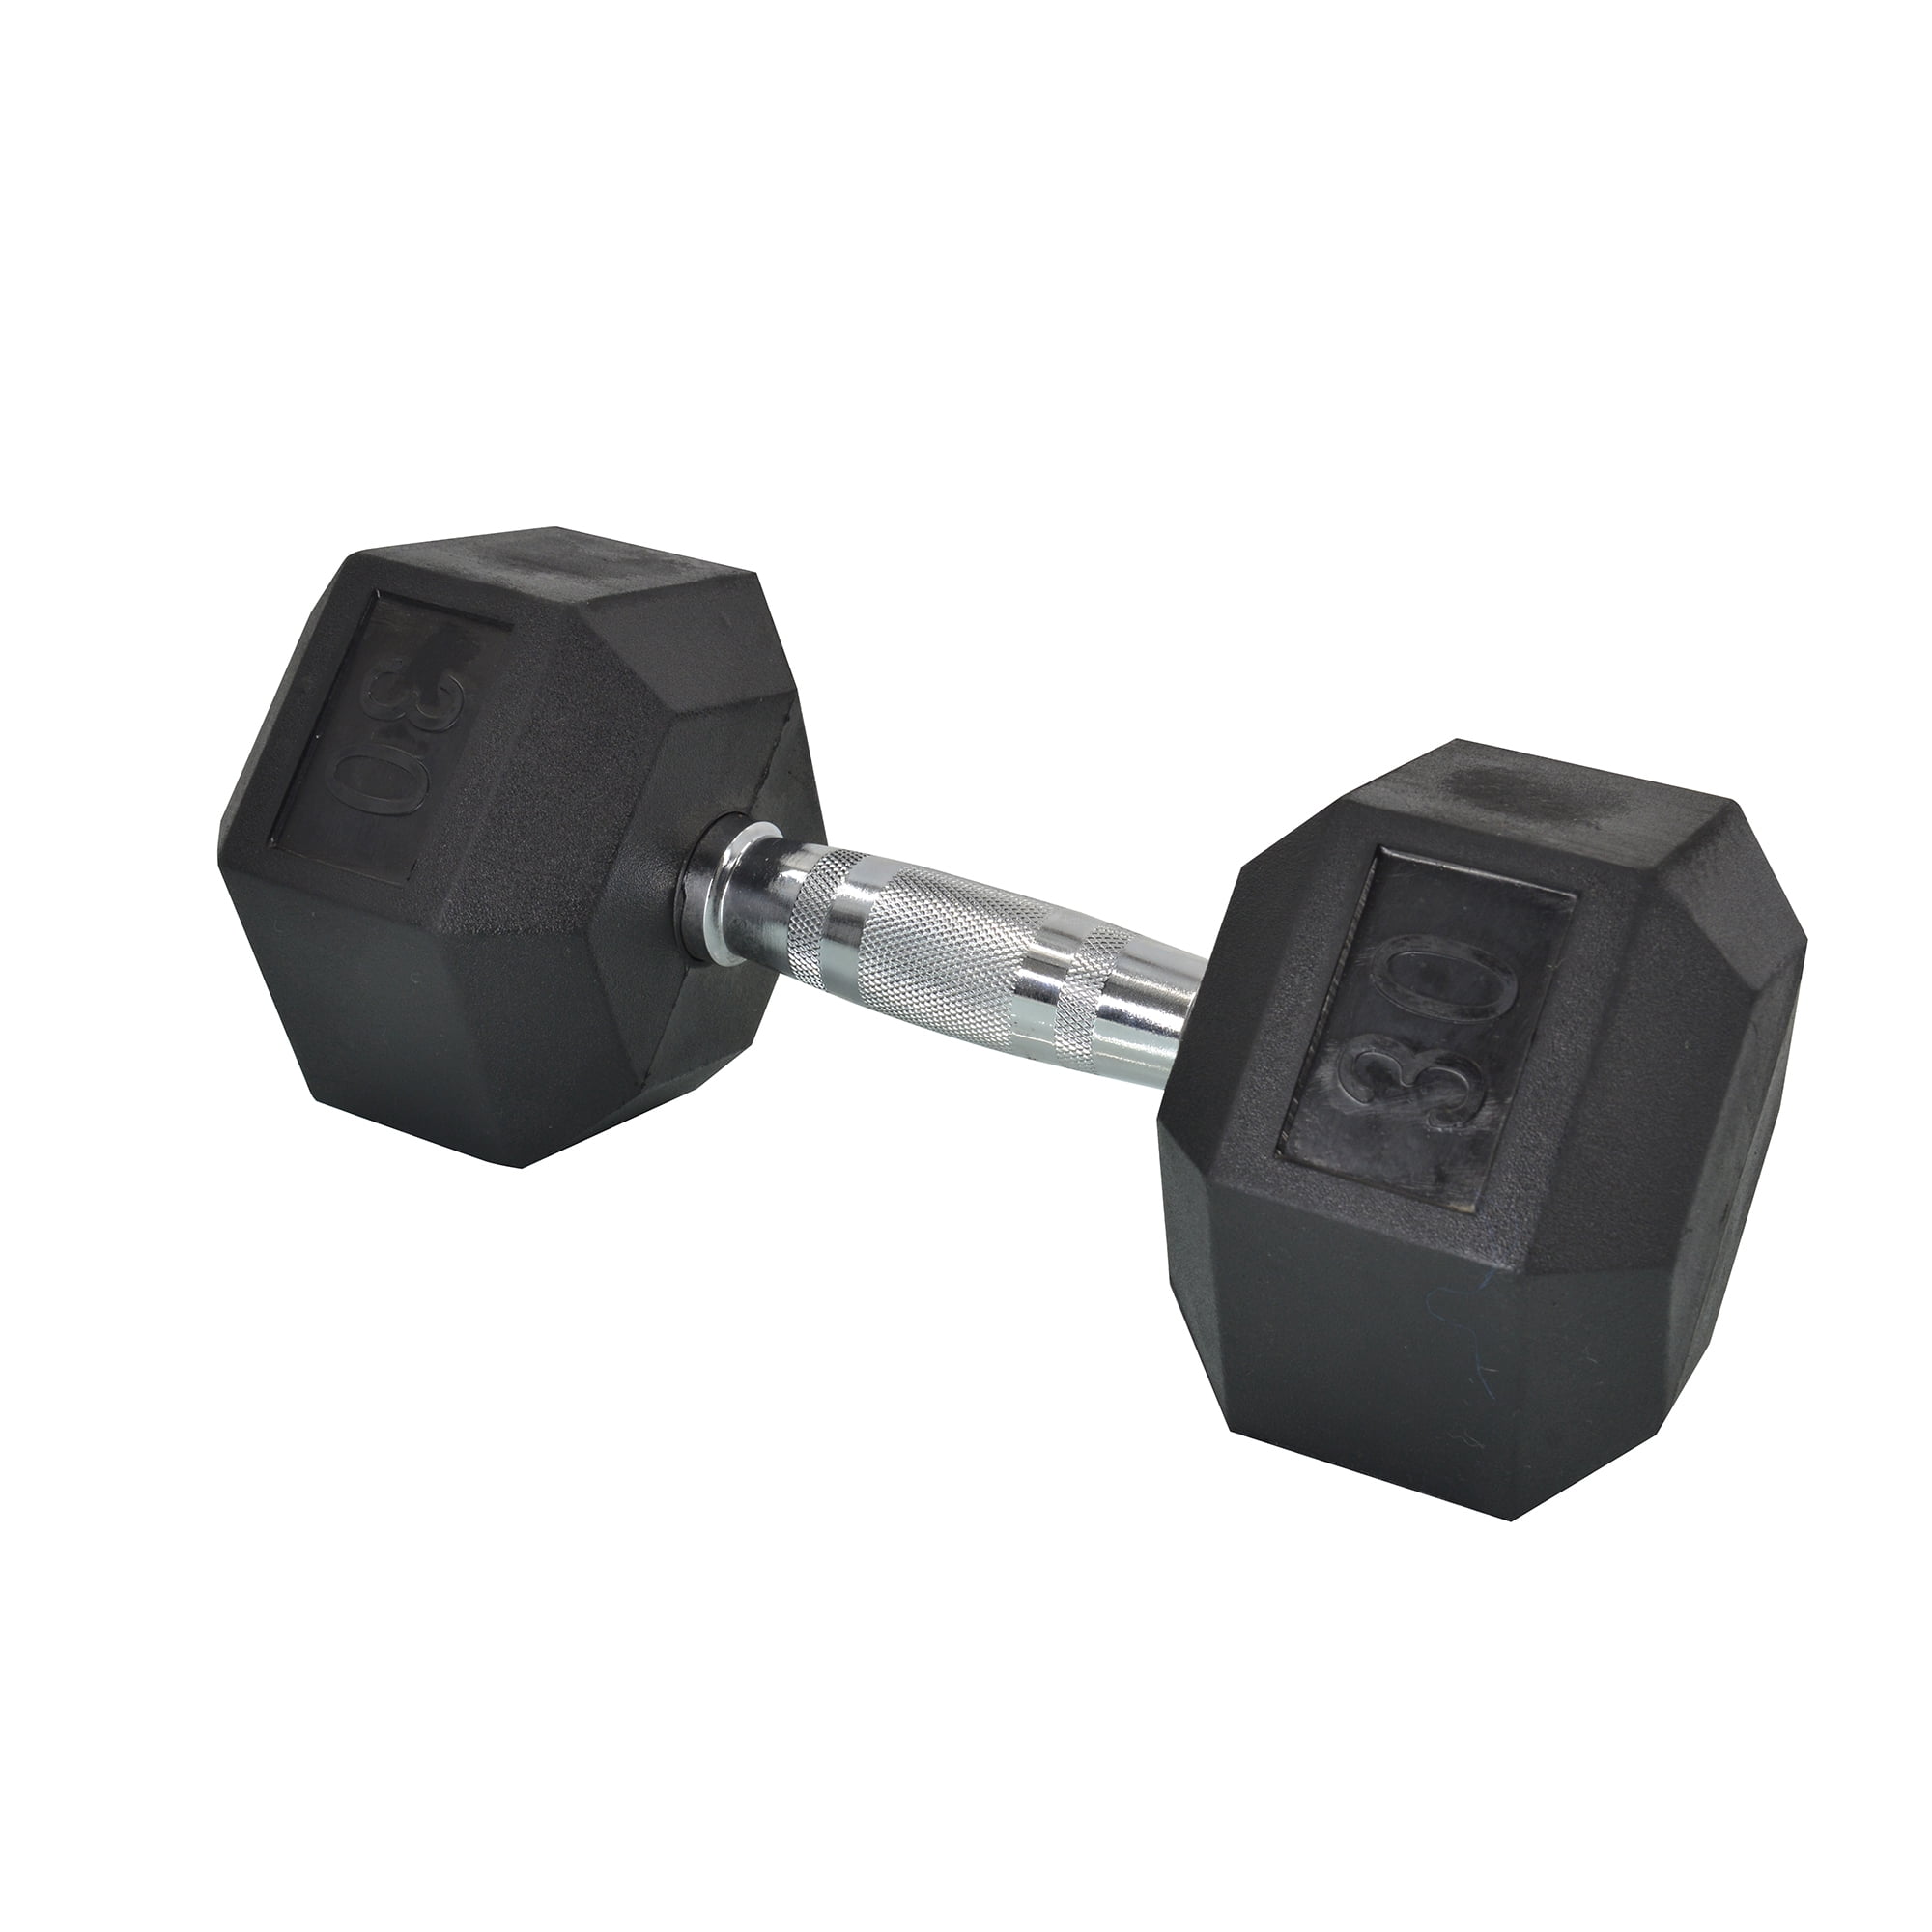 Rubber Coated Hex Dumbbells BEST PRICES 10/15/20/30/35/40  lbs Pounds 